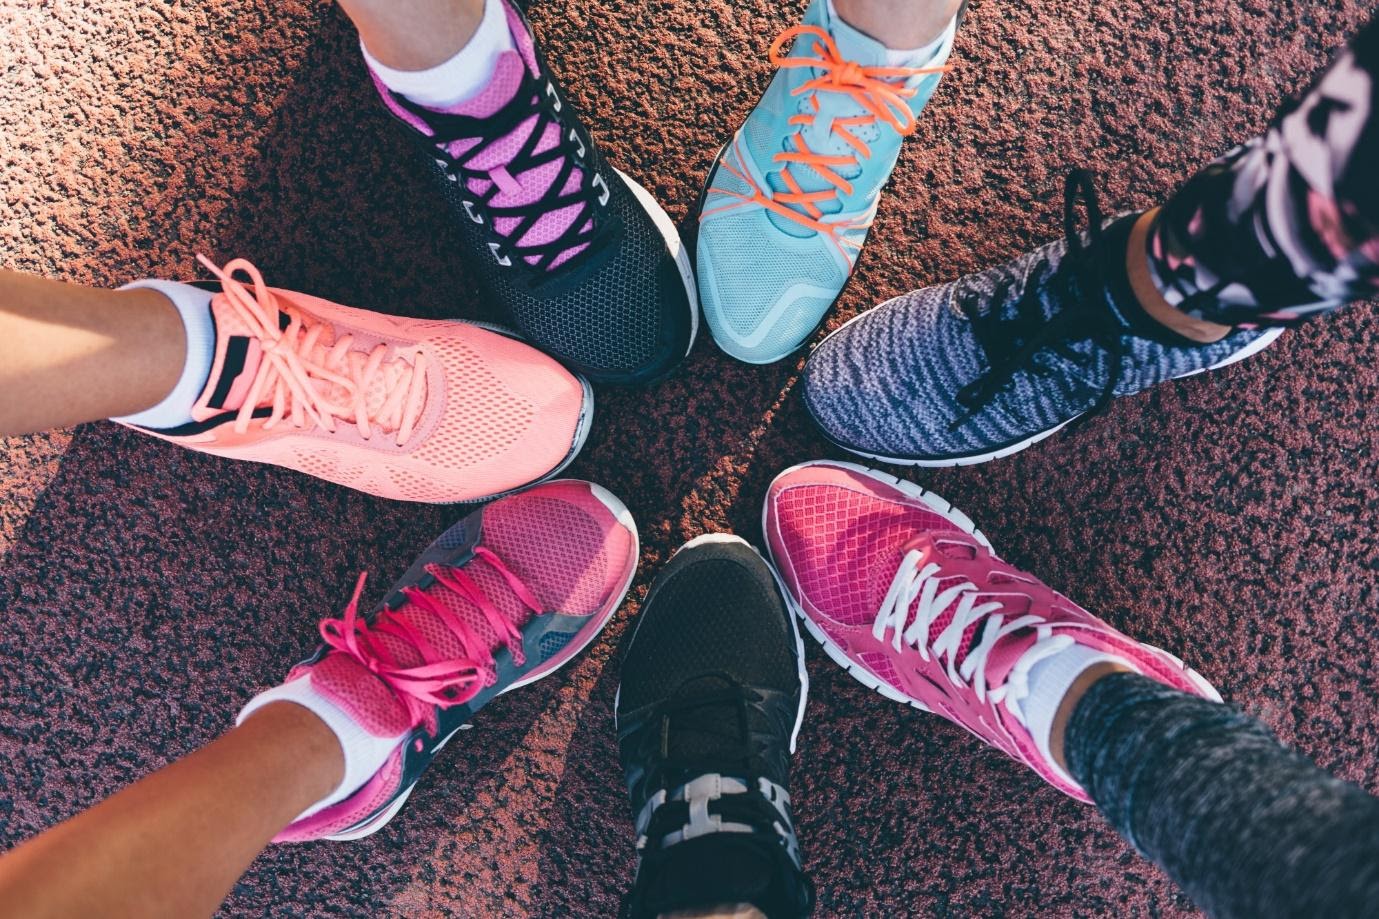 What Are the Different Types of Athletic Shoes That Exist Today?